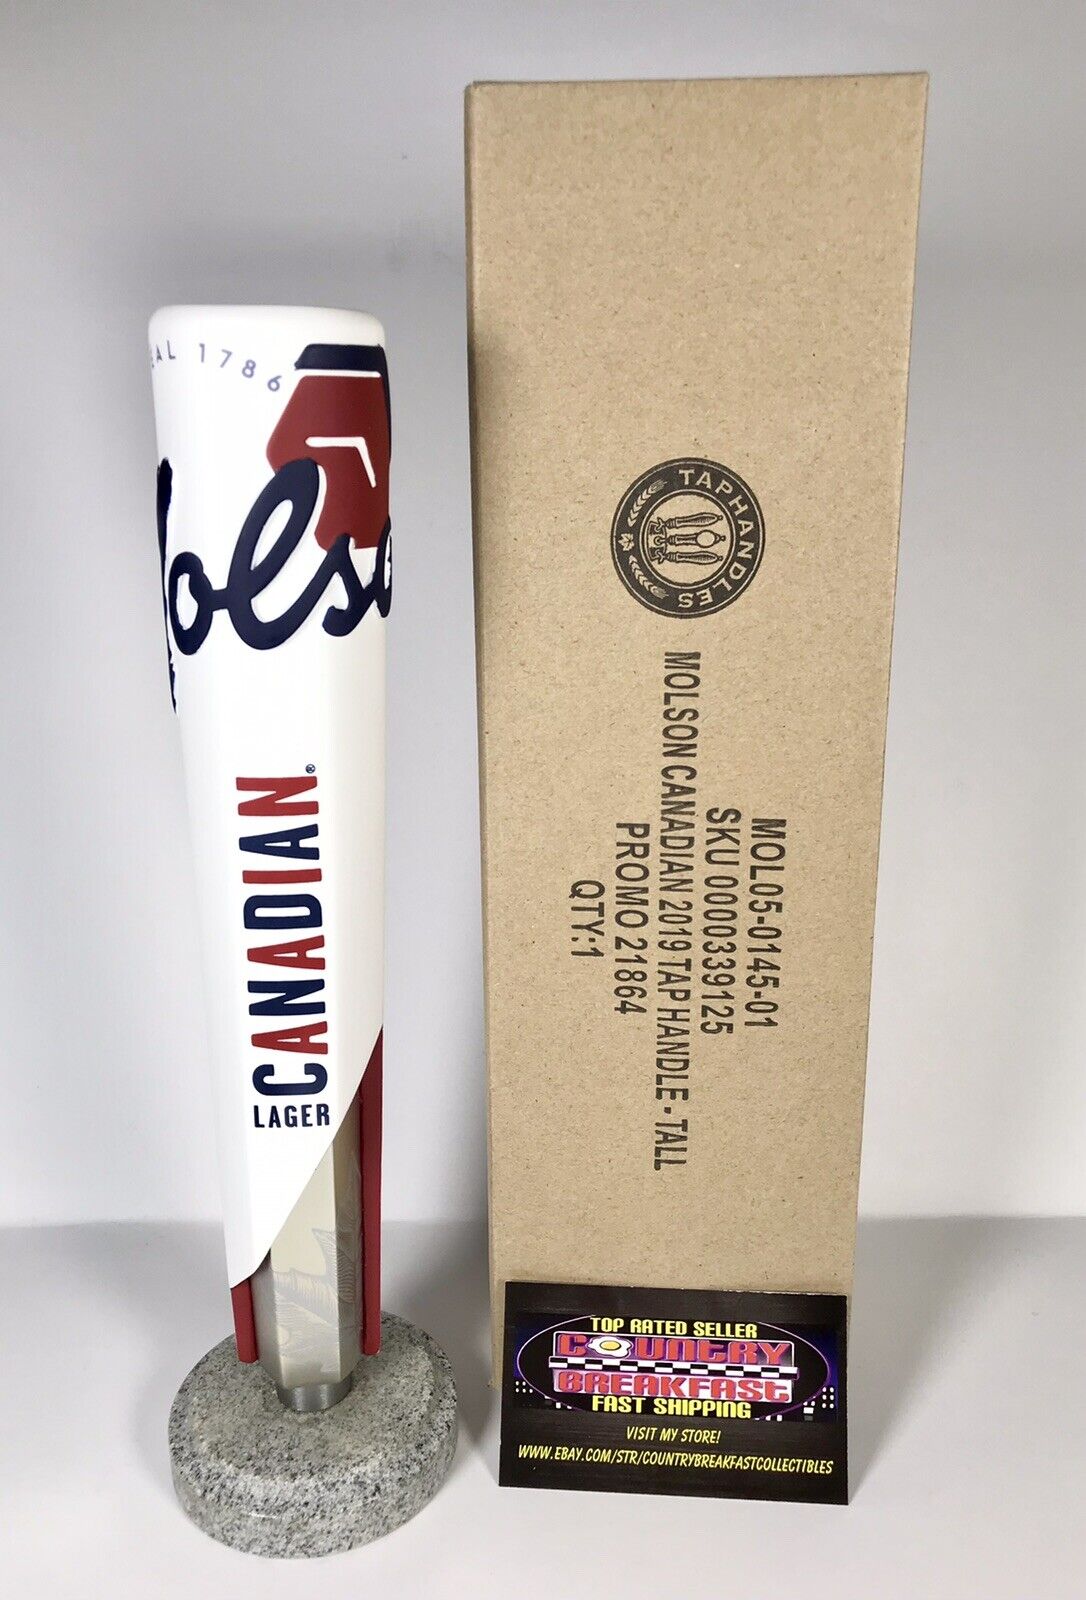 Molson Canadian Lager Maple Leaf Beer Tap Handle 10.5” Tall - Brand New In Box